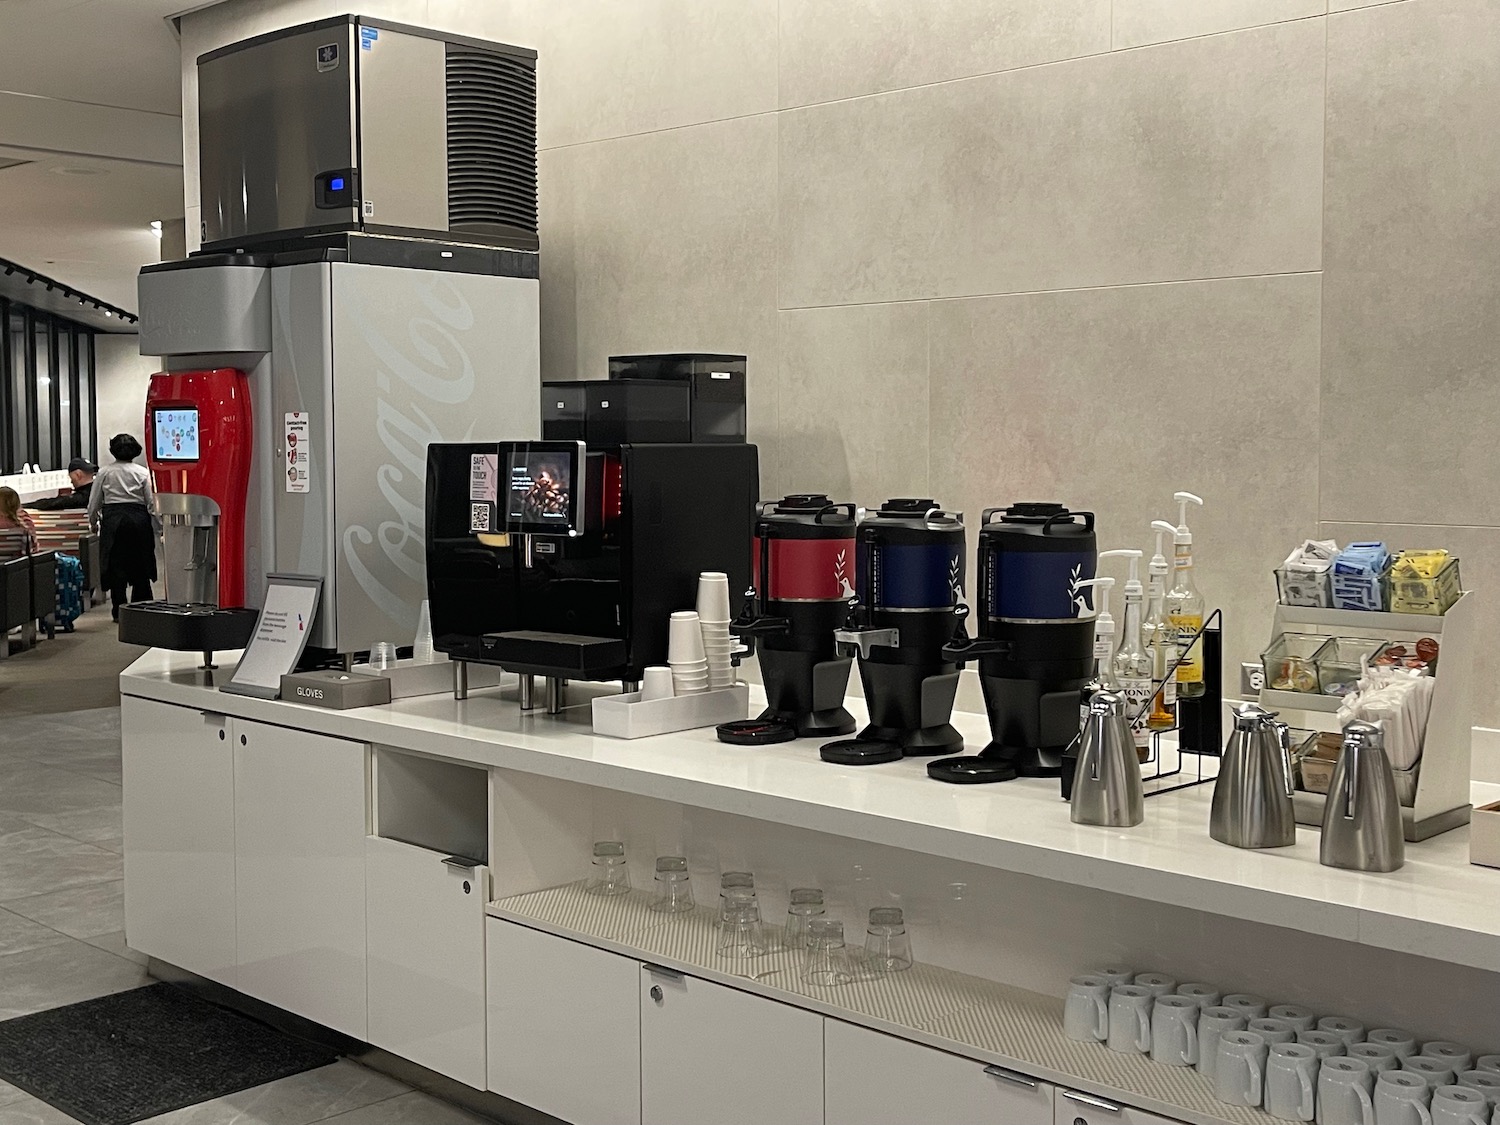 a counter with coffee machines and cups